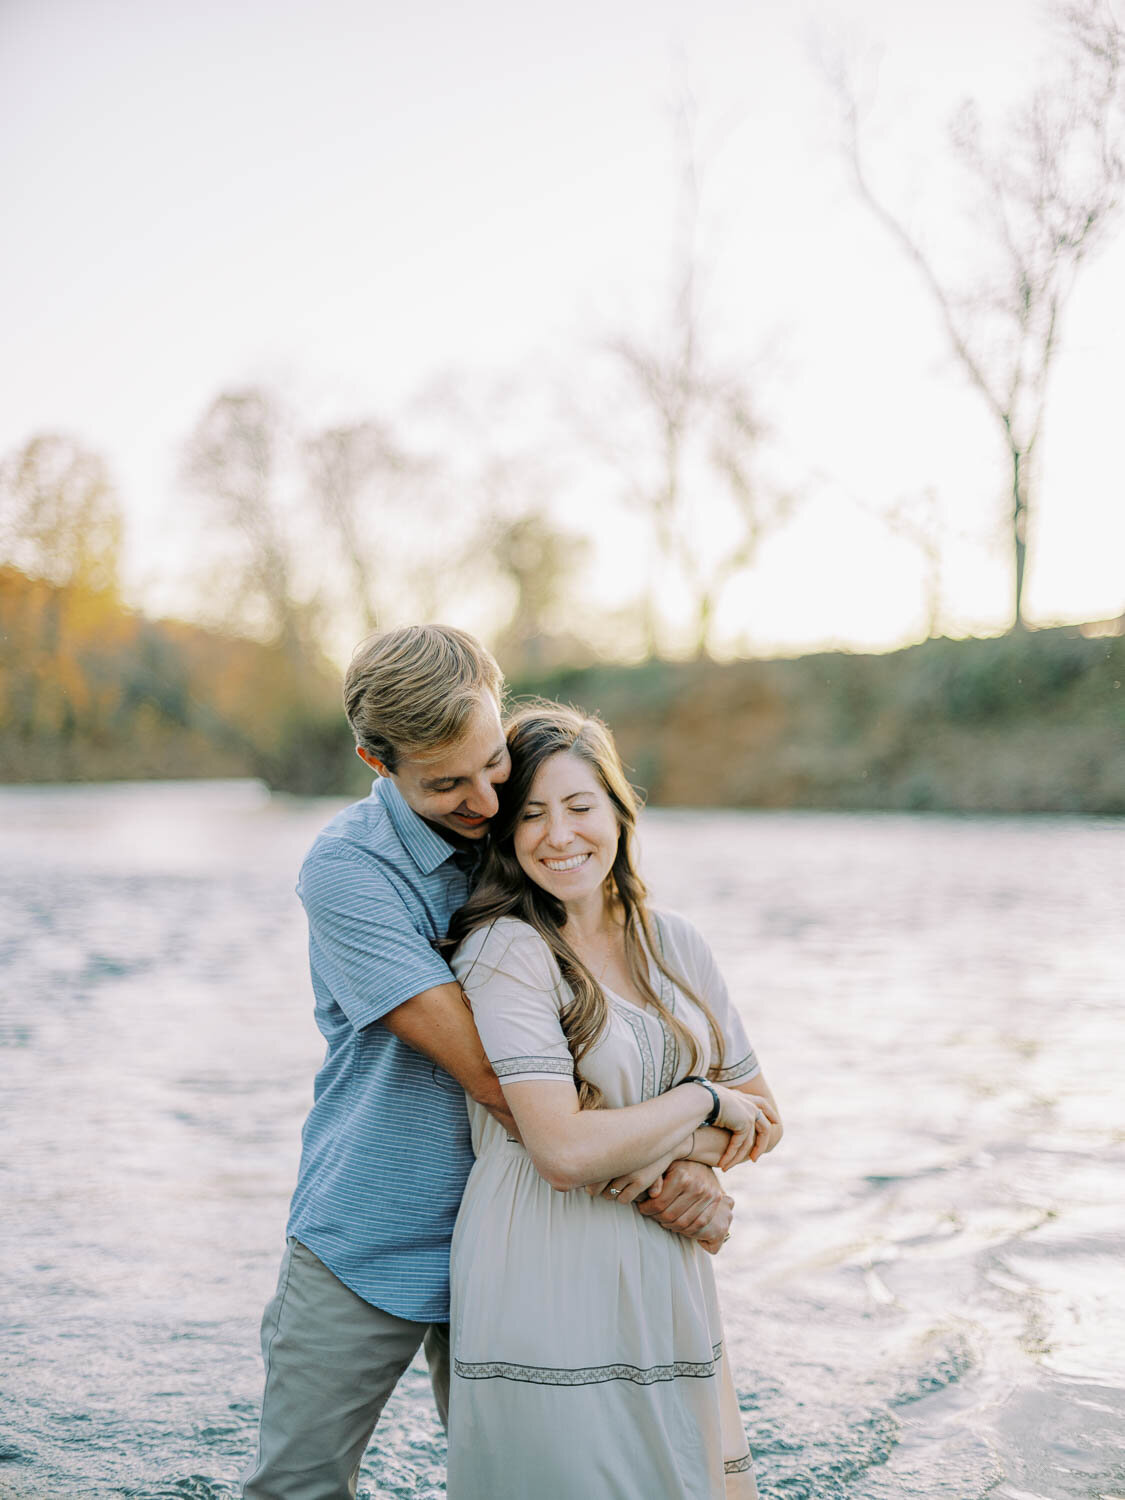 hugging-woman-from-behind-while-standing-in-rivanna-river-during-fall-engagement-session-at-golden-hour-in-charlottesville-virginia.jpg